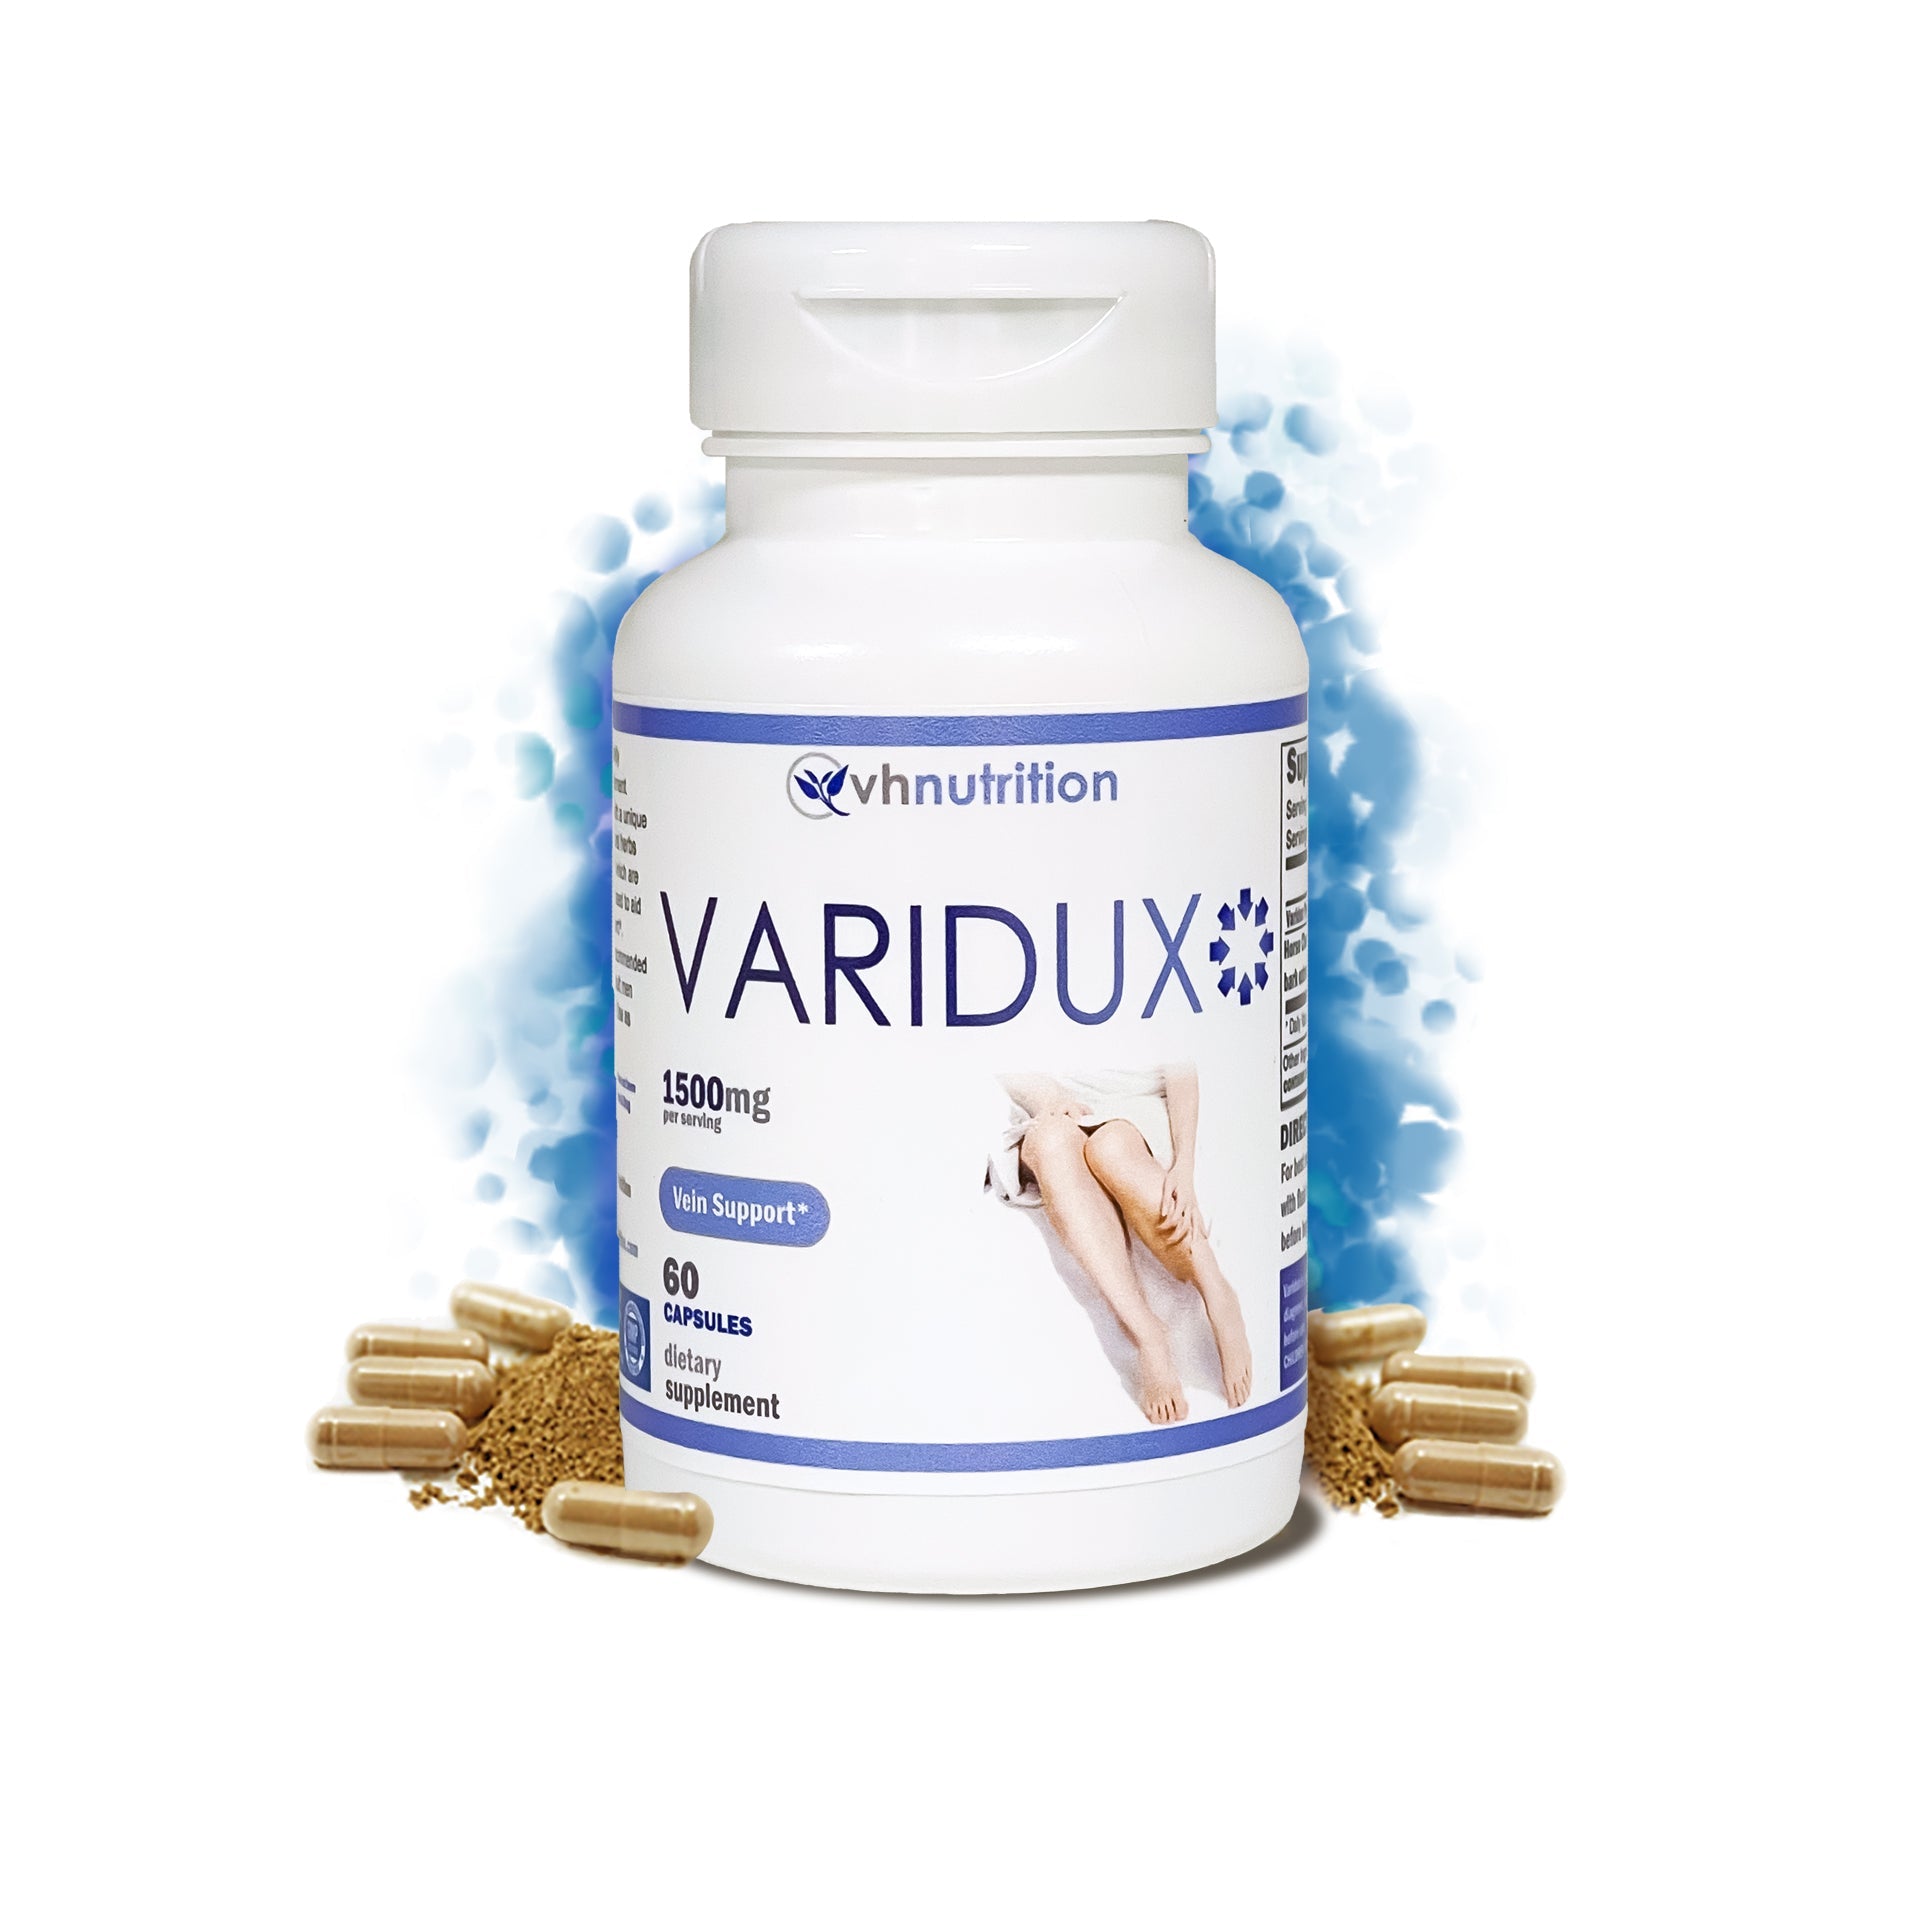 VH Nutrition VARIDUX | Vein Support* Supplements | Varicose Vein Relief* and Vascular Support* | Grape Seed Extract, Pine Bark, Butchers Broom | 60 Capsules